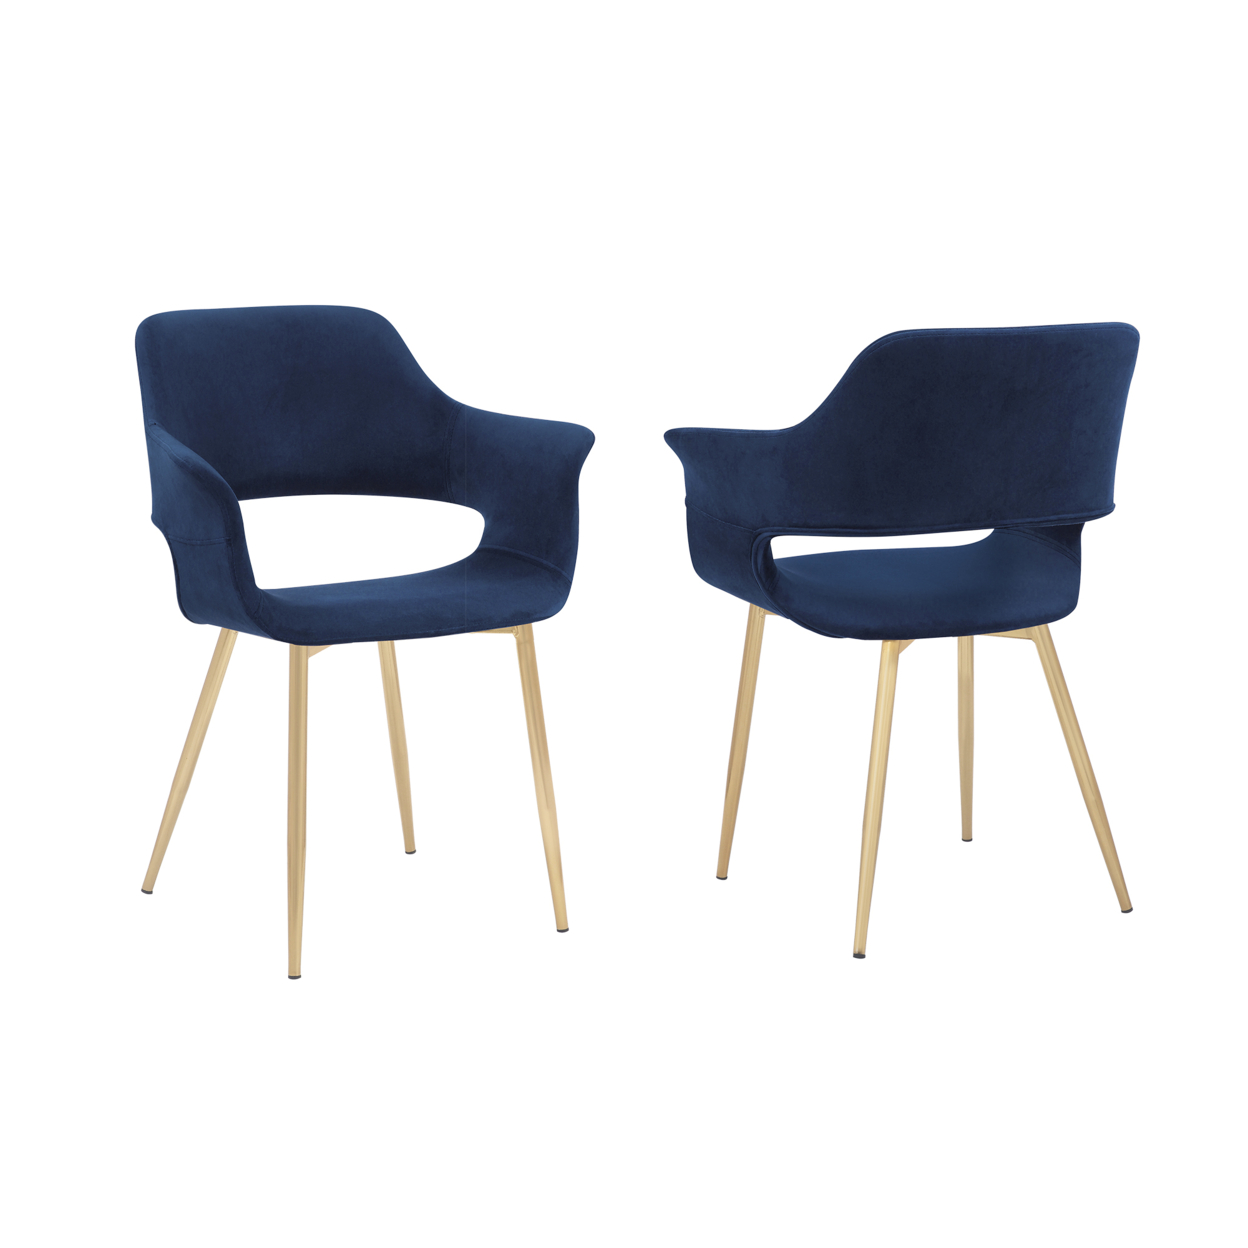 Dining Chair With Flared Curved Arms And Angled Metal Legs, Set Of 2, Blue- Saltoro Sherpi